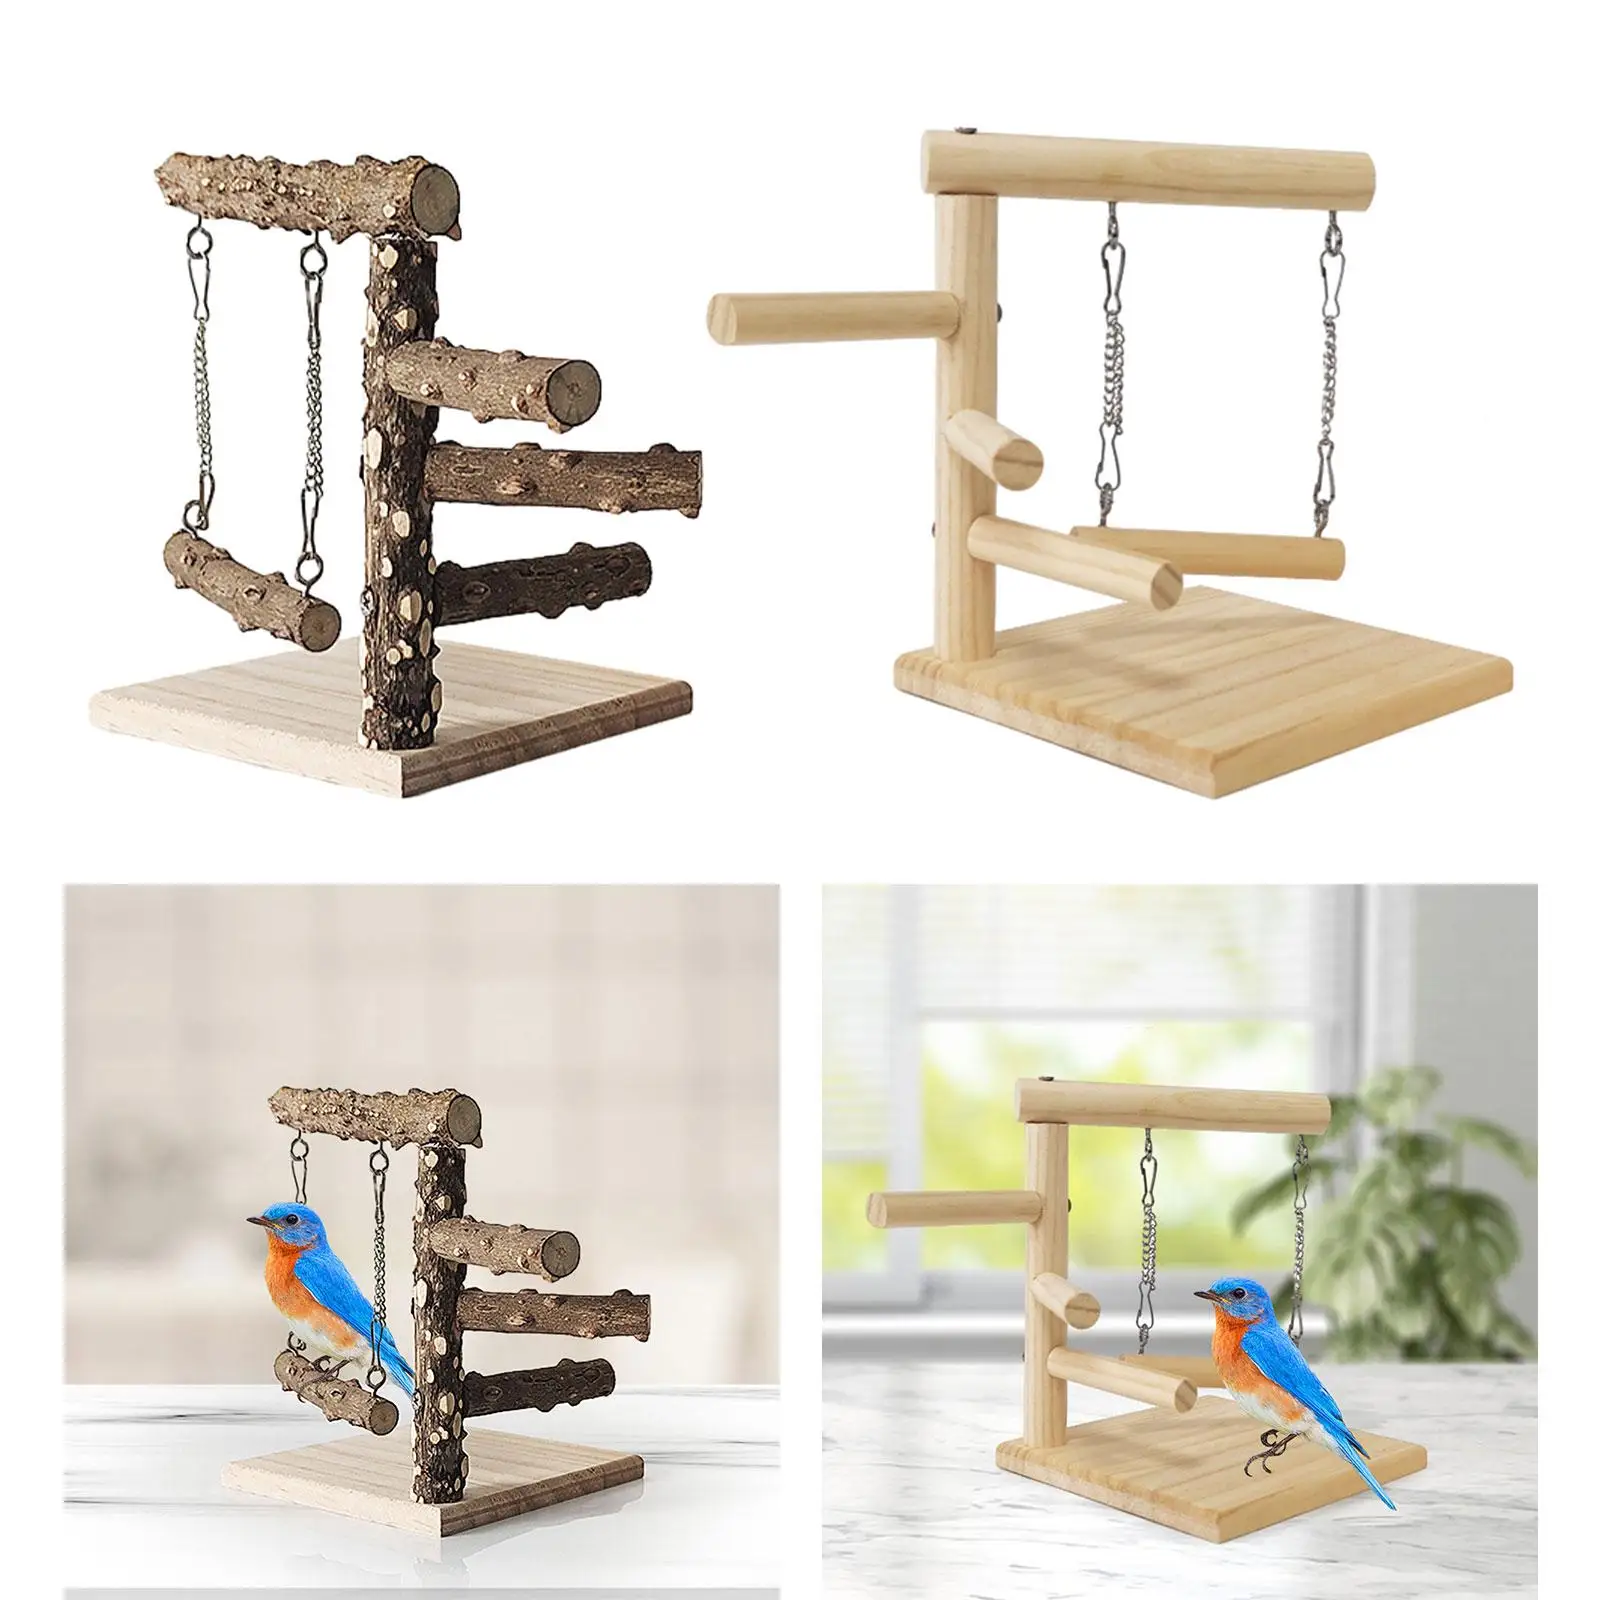 Wood Birds Cage Toys Gym Playground Bird Tabletop Training Perch Play Stand for Cockatiels Lovebirds Parakeets Parrots